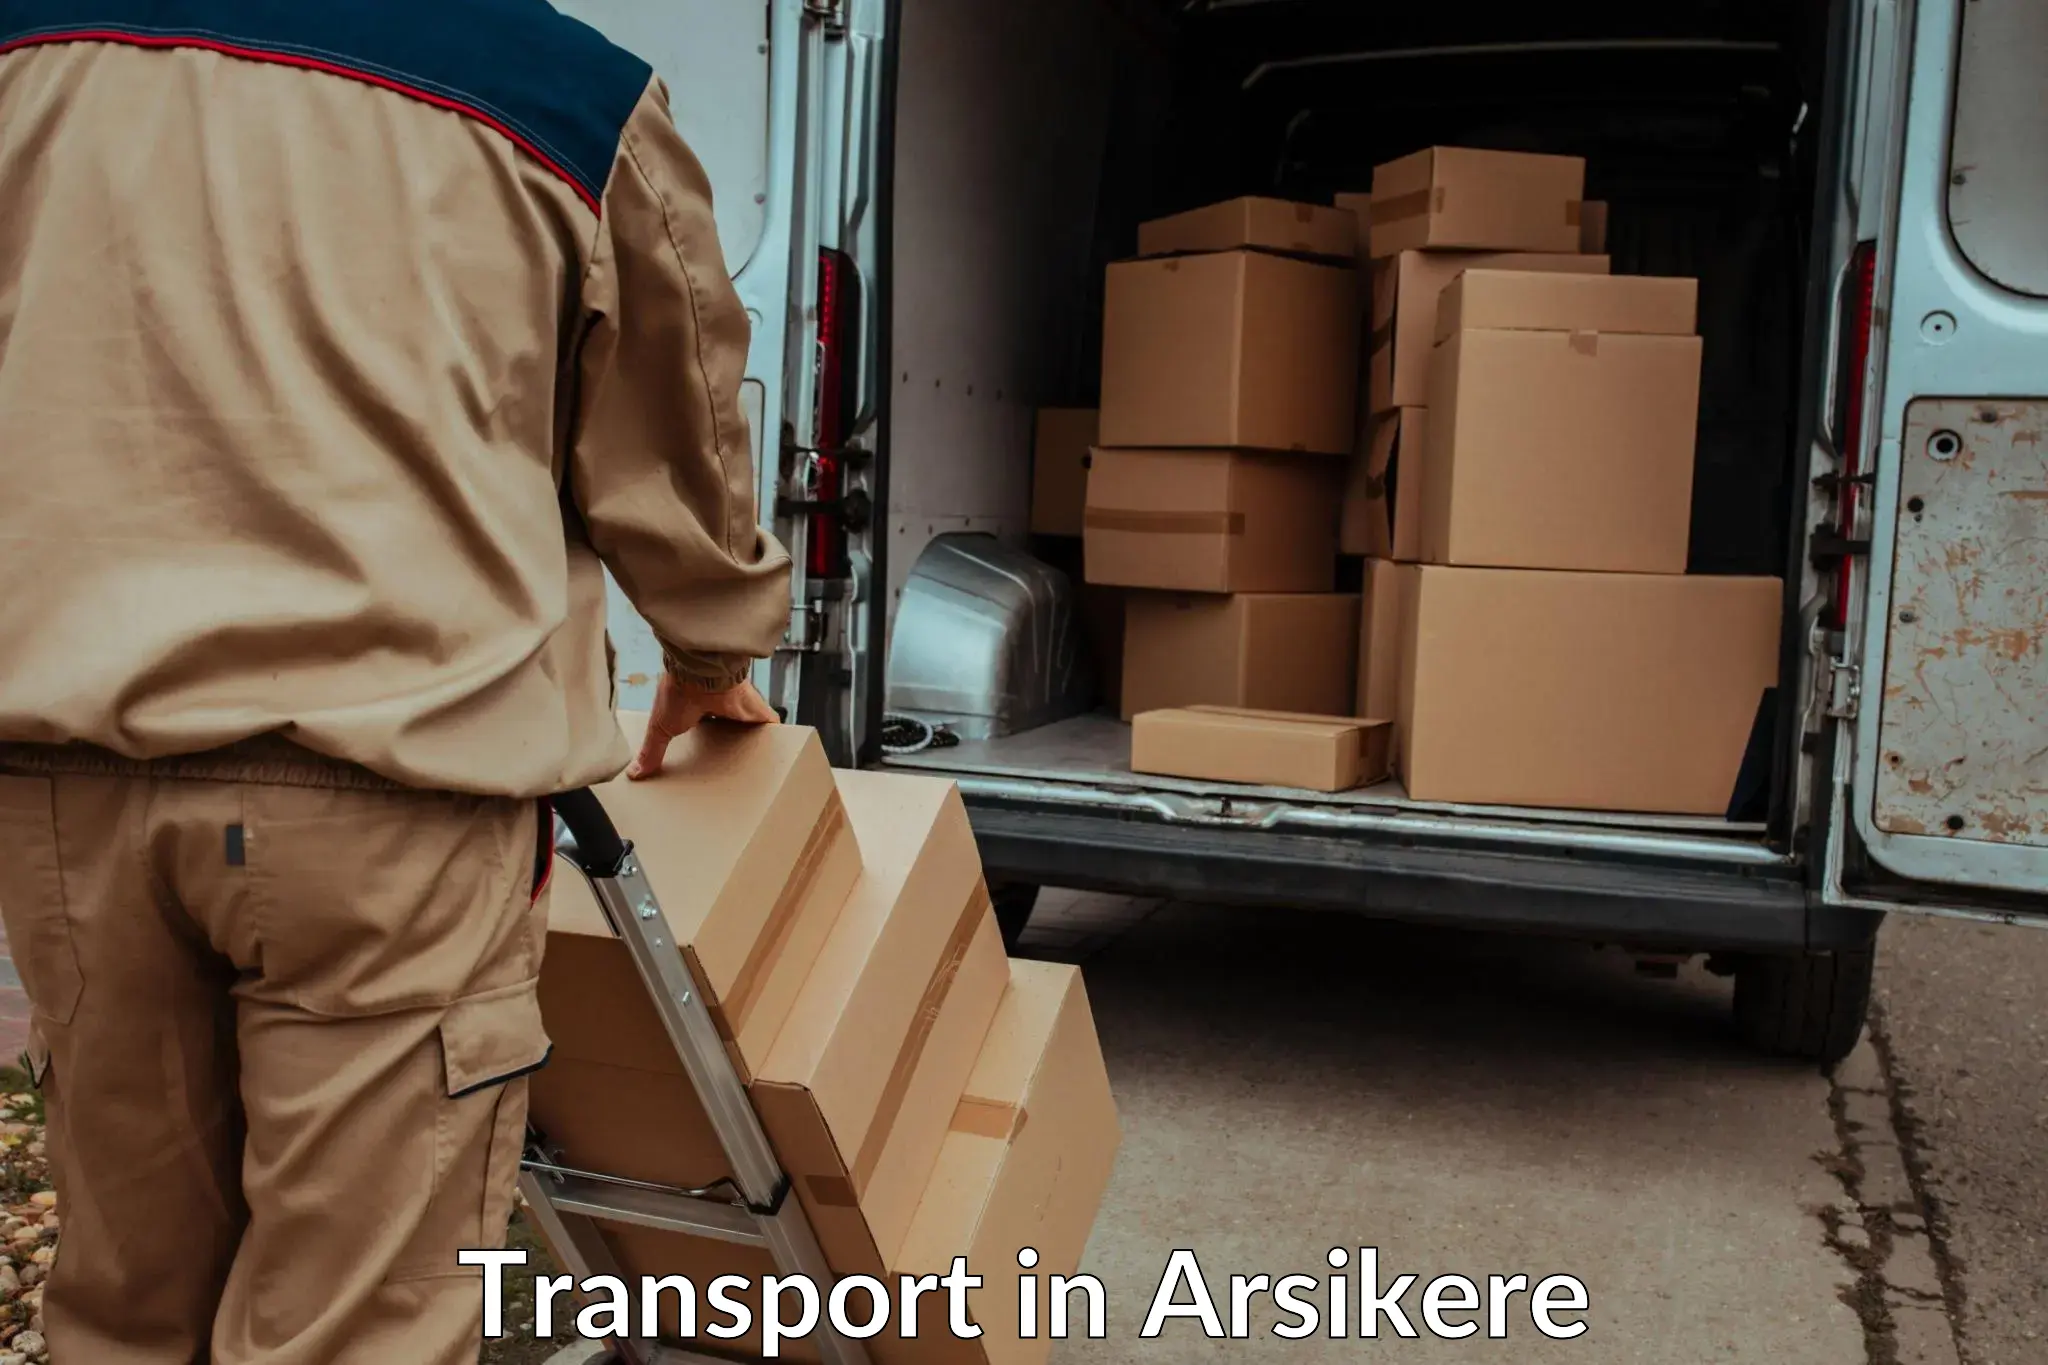 Vehicle transport services in Arsikere